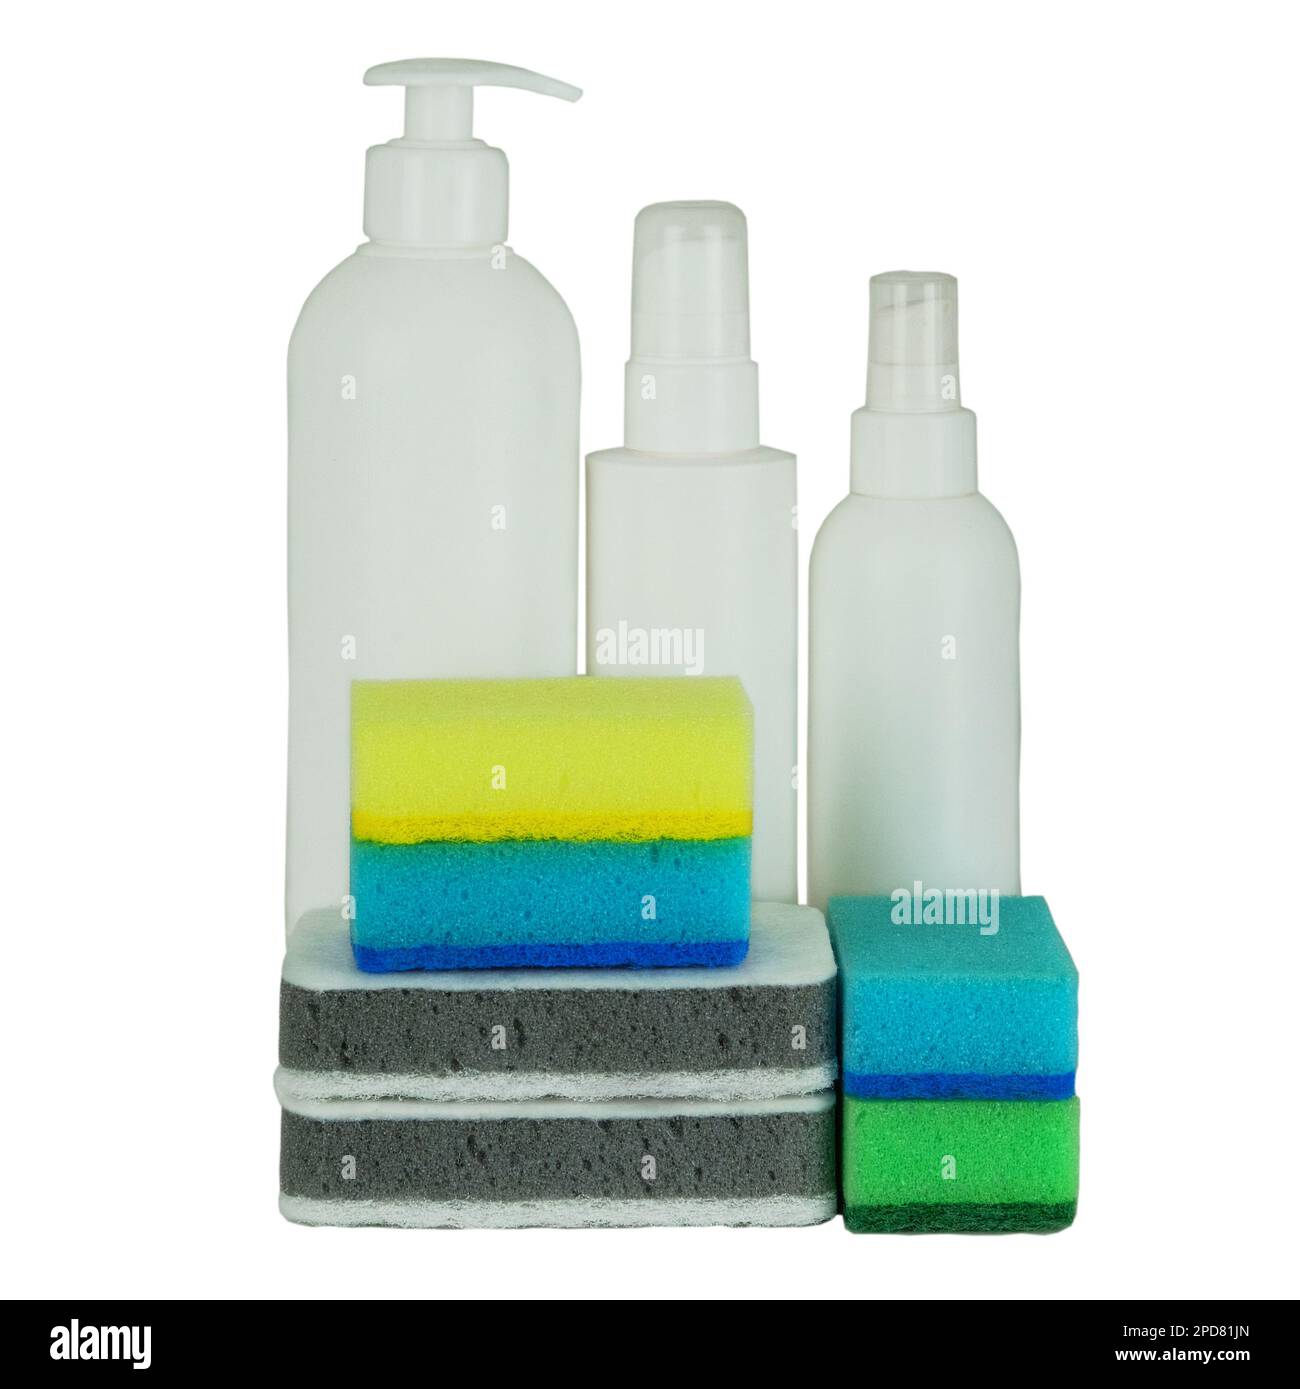 https://c8.alamy.com/comp/2PD81JN/detergents-in-spray-leaning-accessories-stack-of-cleaning-sponges-and-bottle-with-a-cleaning-service-concept-2PD81JN.jpg